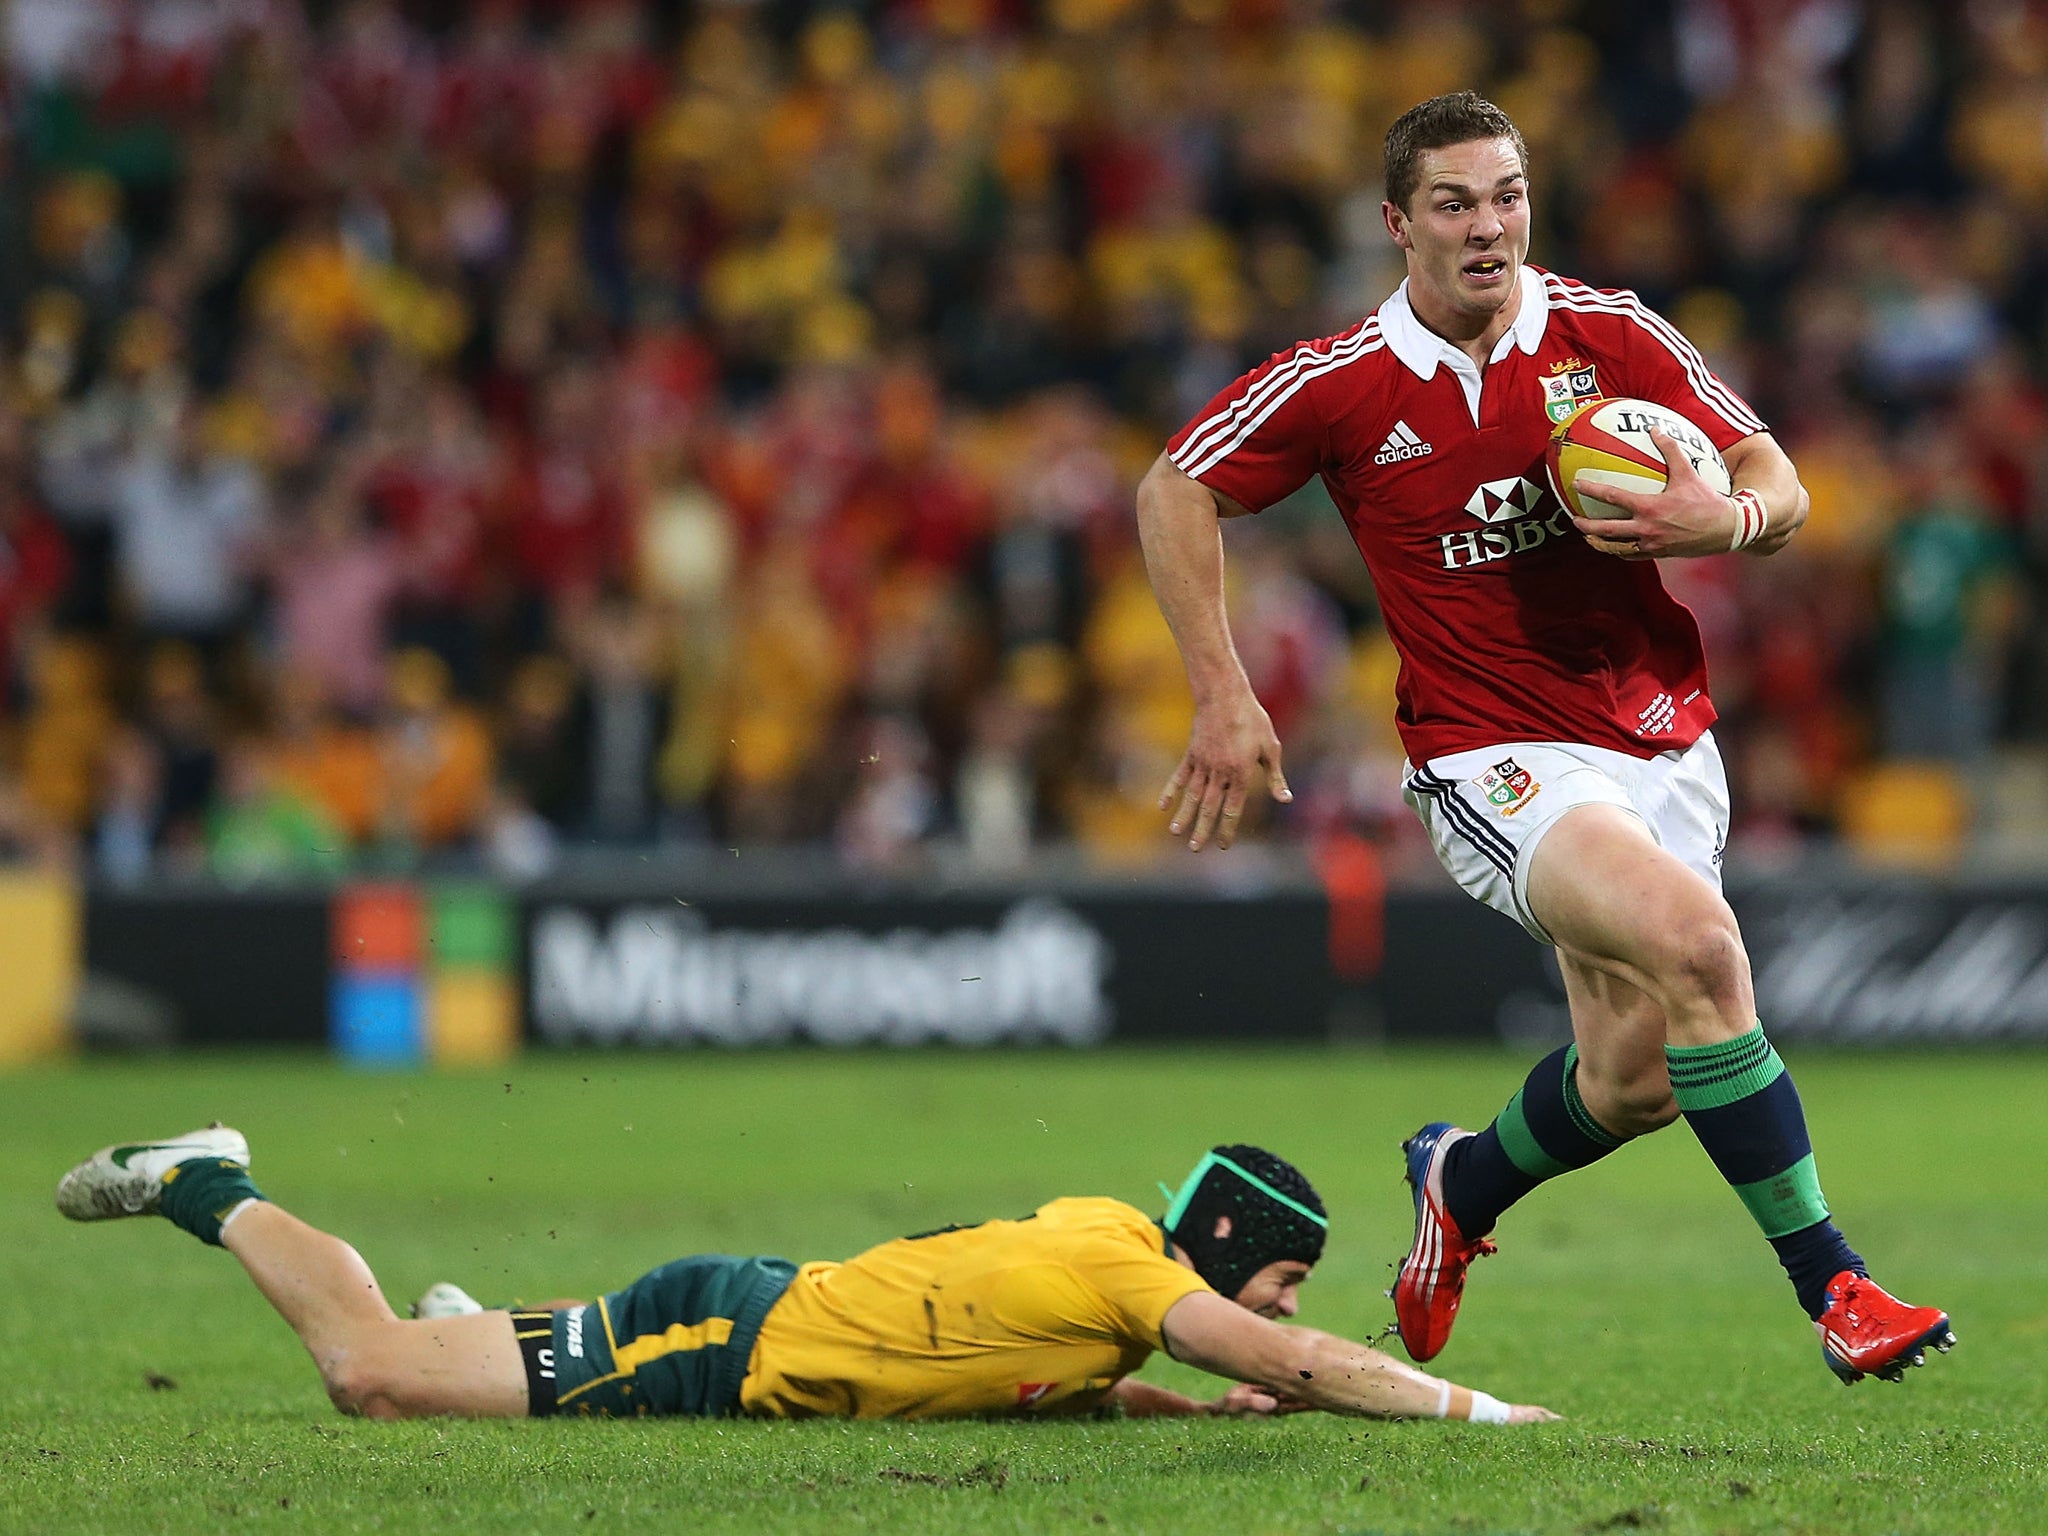 George North on his way to scoring a try against Australia